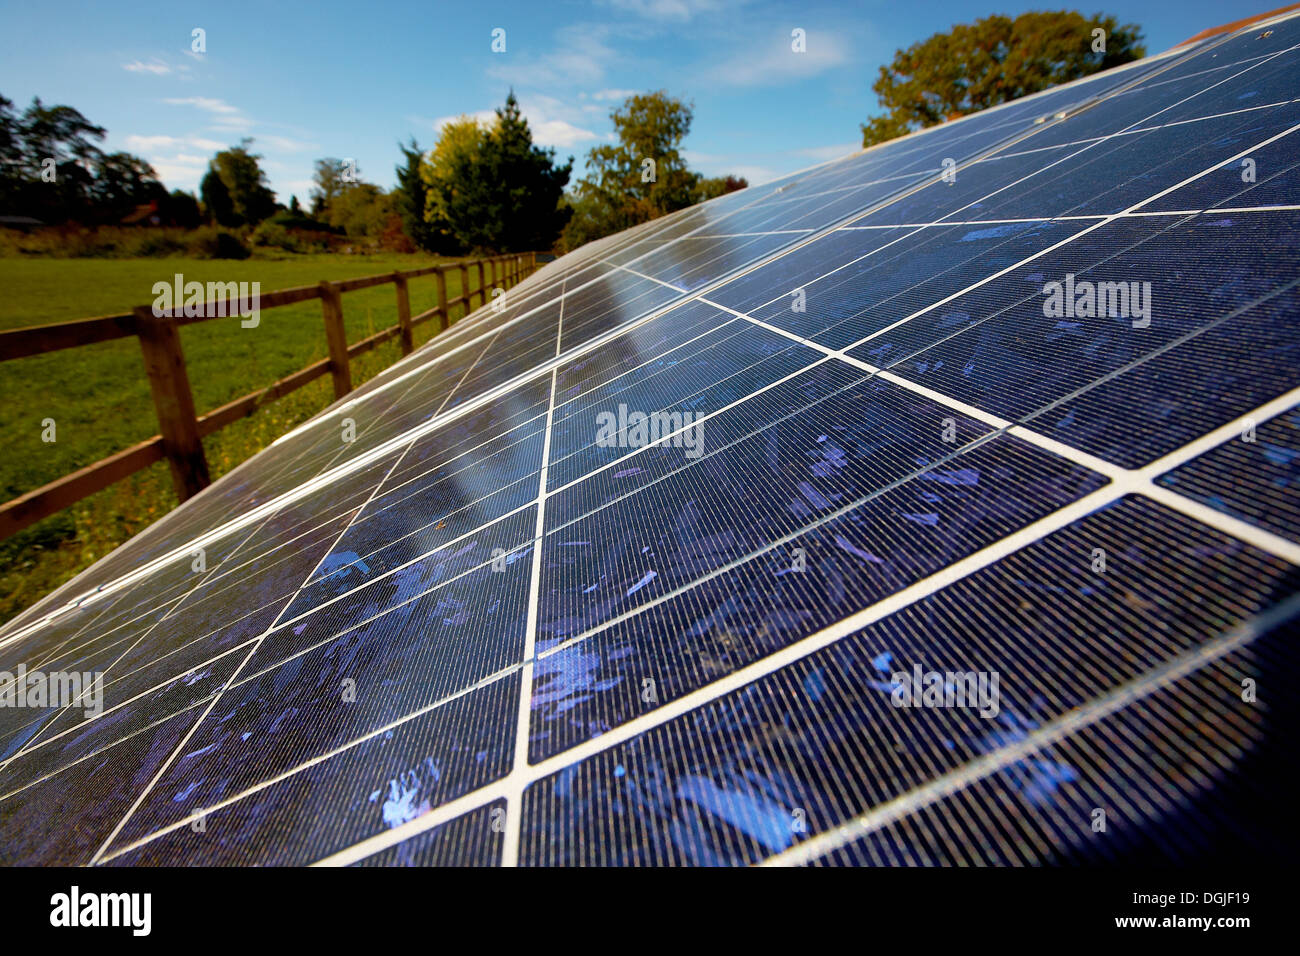 Solar panel array in a rural location in England. Stock Photo